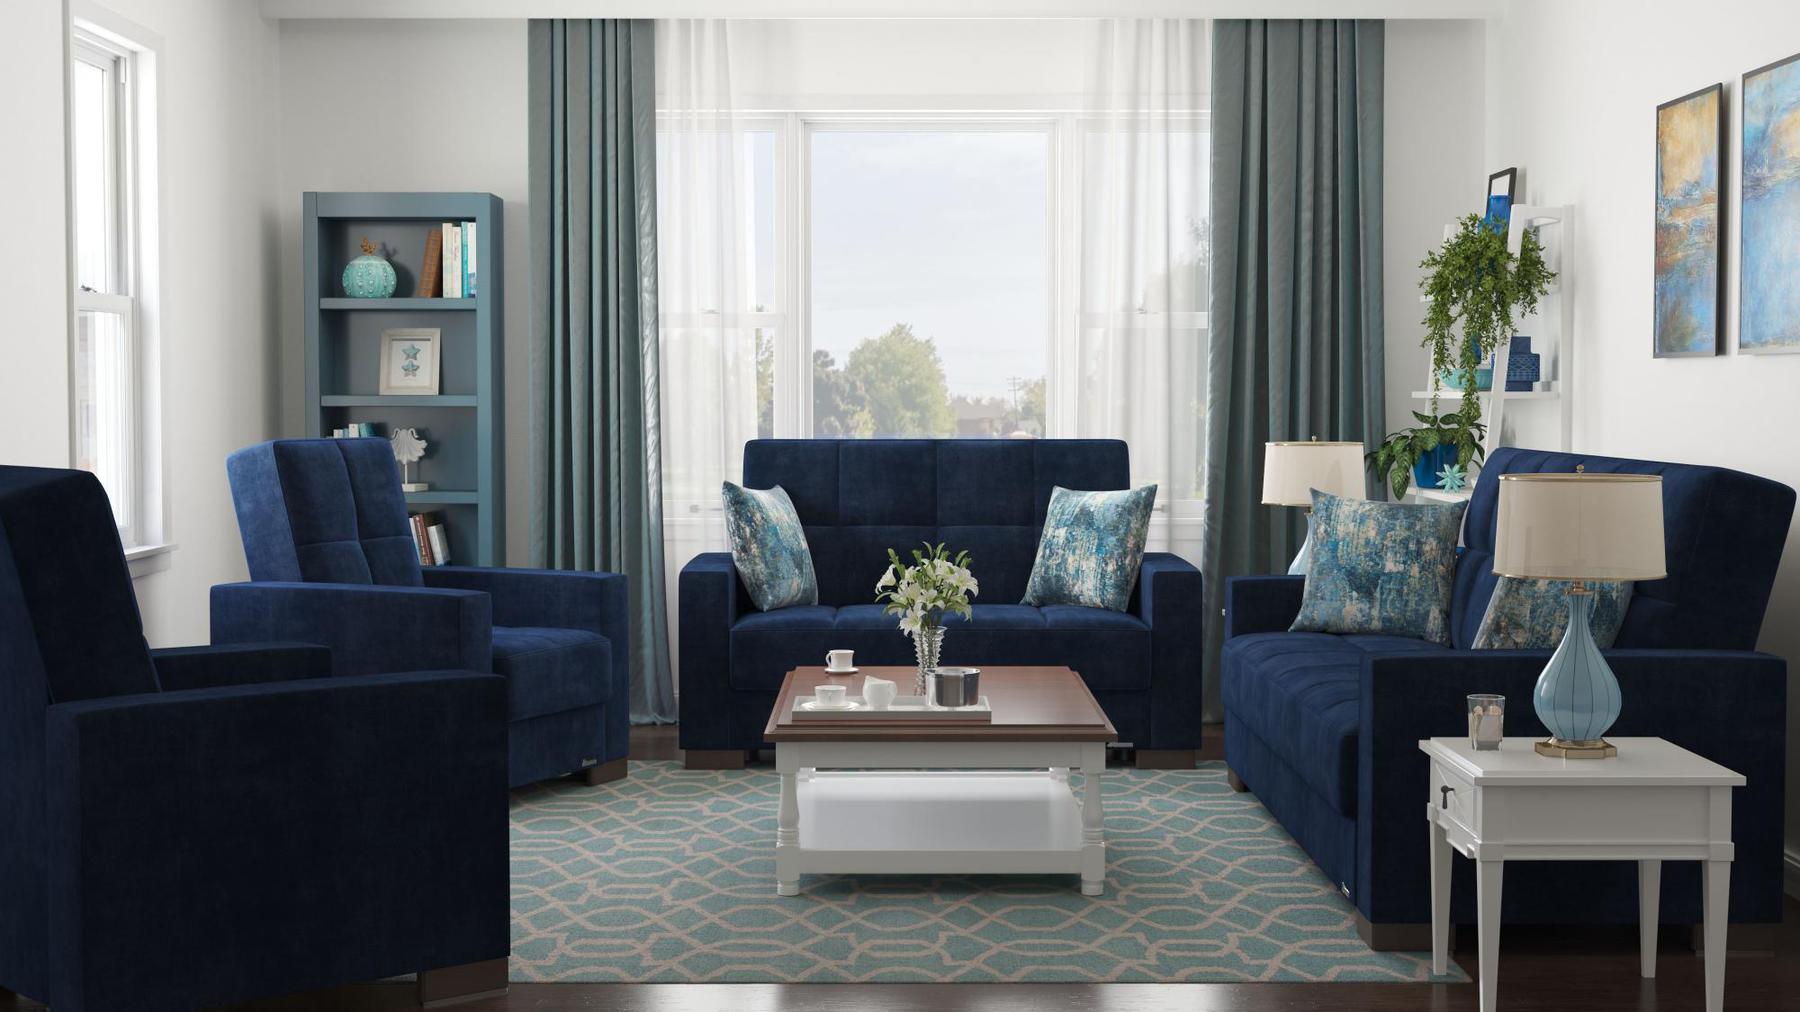 Modern design, True Blue , Microfiber upholstered convertible sleeper Loveseat with underseat storage from Voyage Track by Ottomanson in living room lifestyle setting with the matching furniture set. This Loveseat measures 67 inches width by 36 inches depth by 41 inches height.